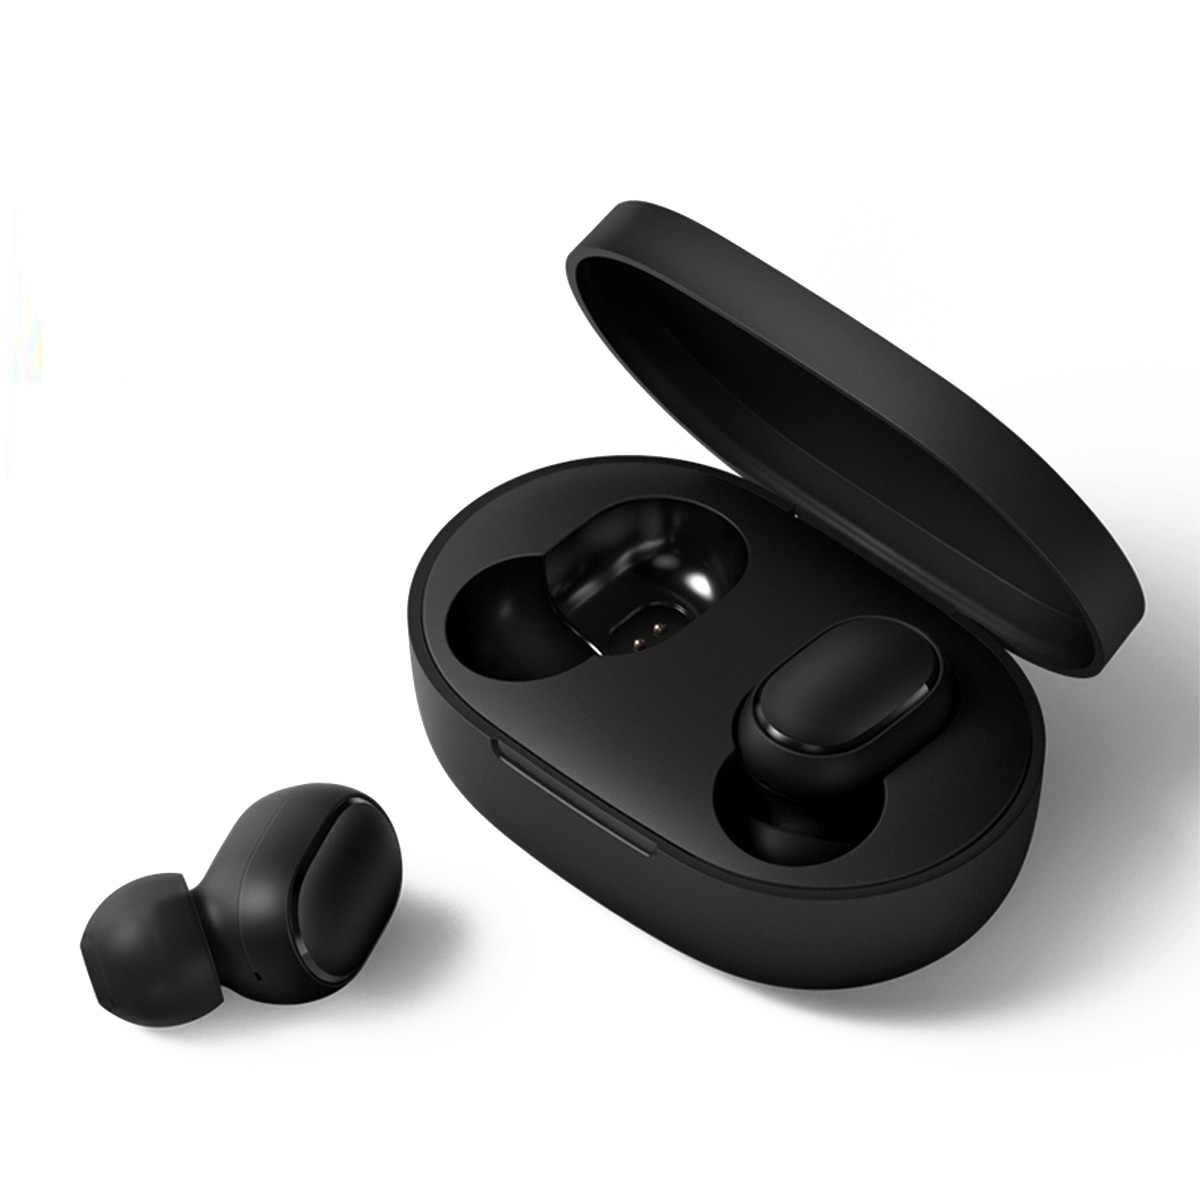 Redmi Airdots 3 TWS earbud launched